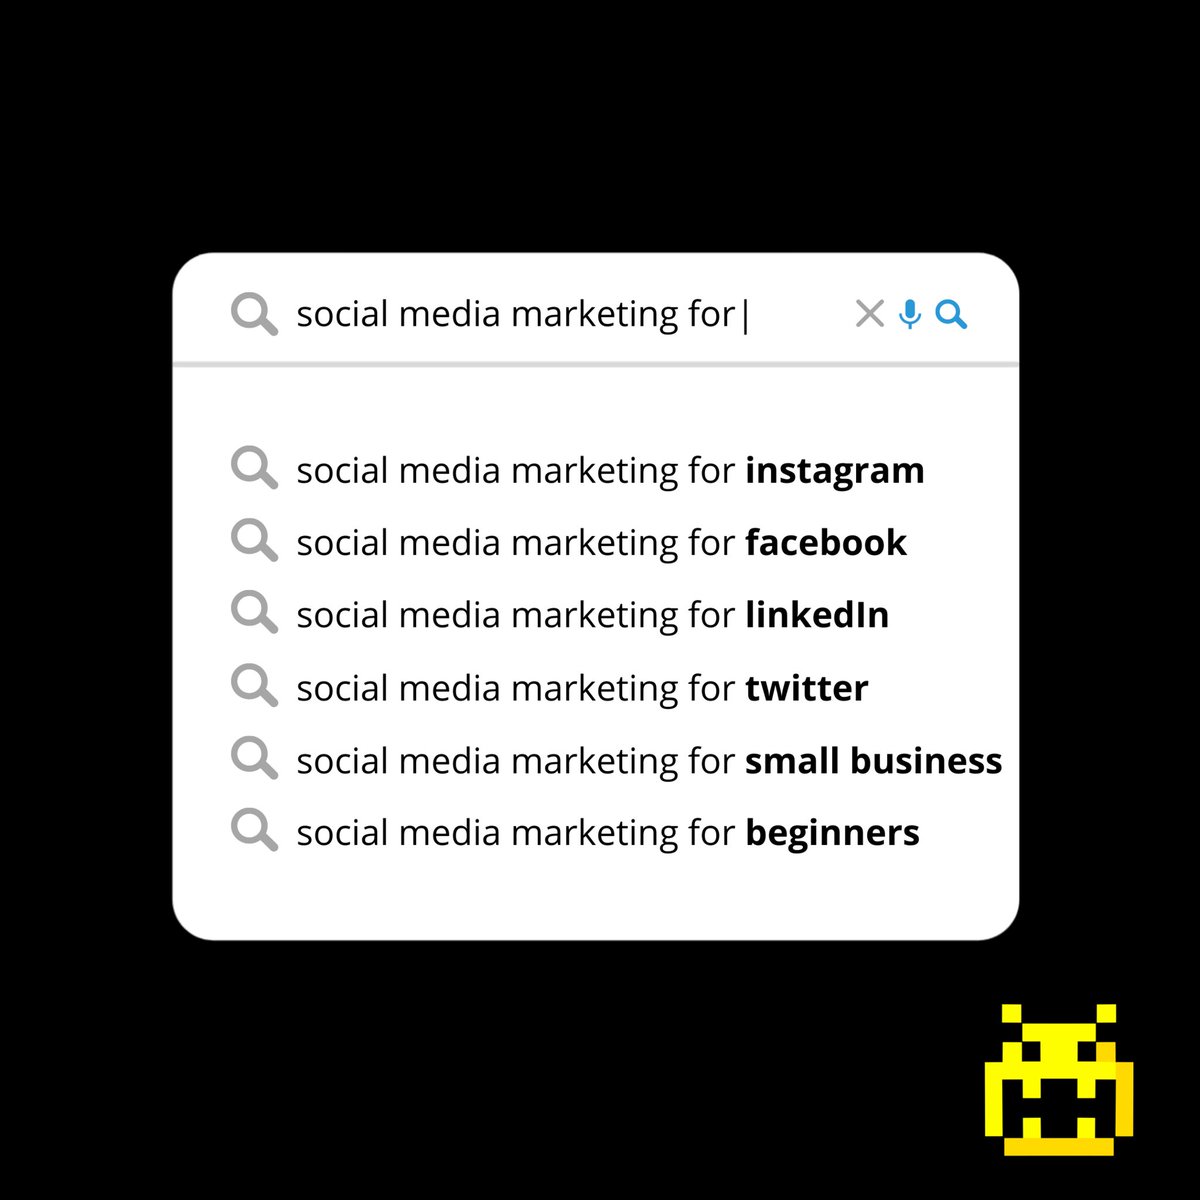 Starting your social media marketing journey can be stressful. We are here to help guide you on your way! Stop by bytesizedigital.com and set up a consultation today!

#bytesizebuddies #bytesizedigital #builtbybytesize #webdesign #websitedesign #webdesigner #webdevelper #web